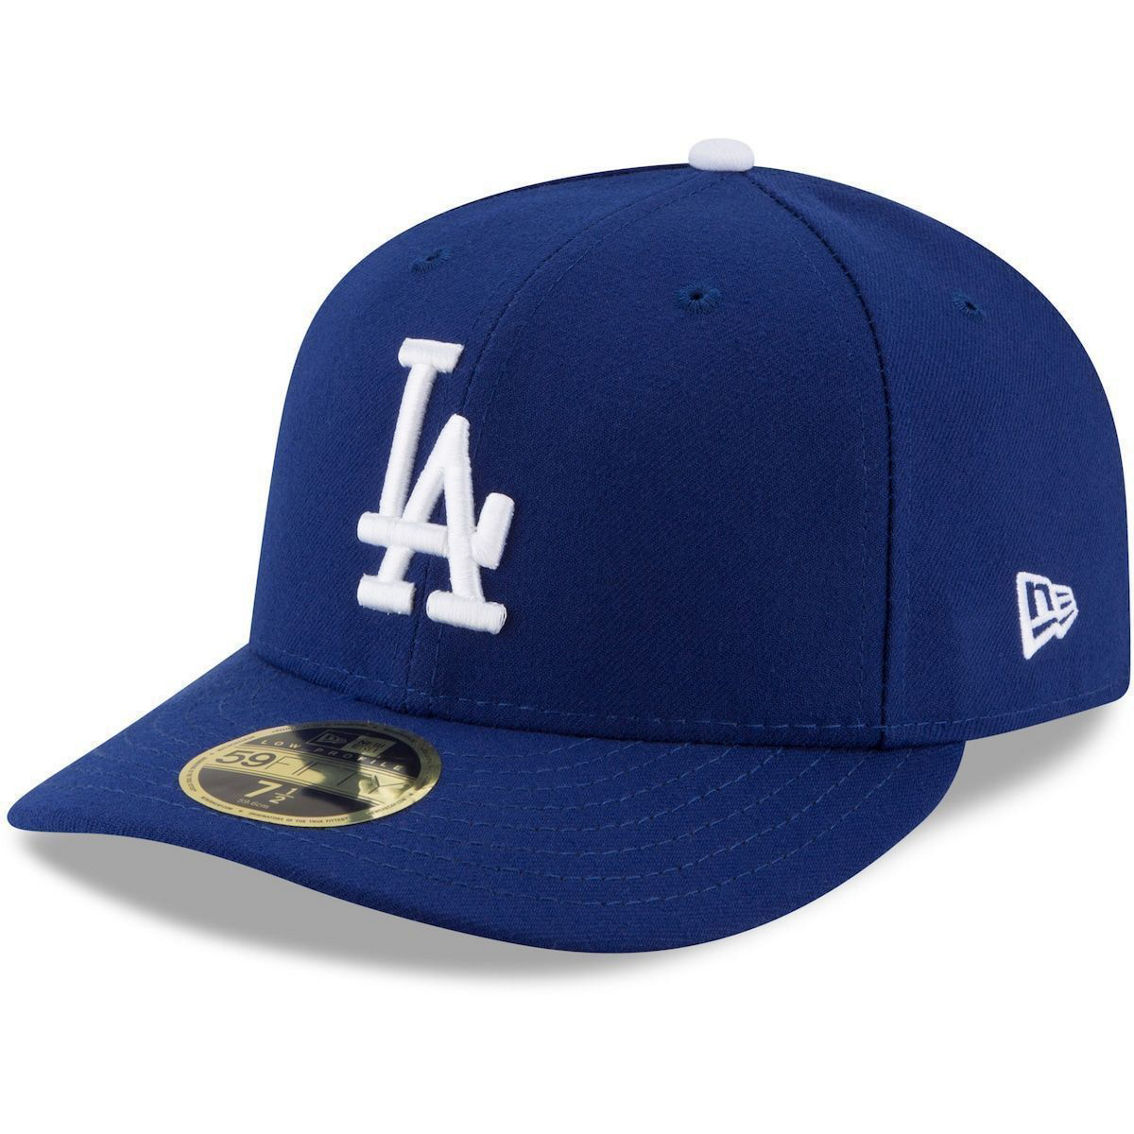 New Era Men's Royal Los Angeles Dodgers Authentic Collection On-field ...